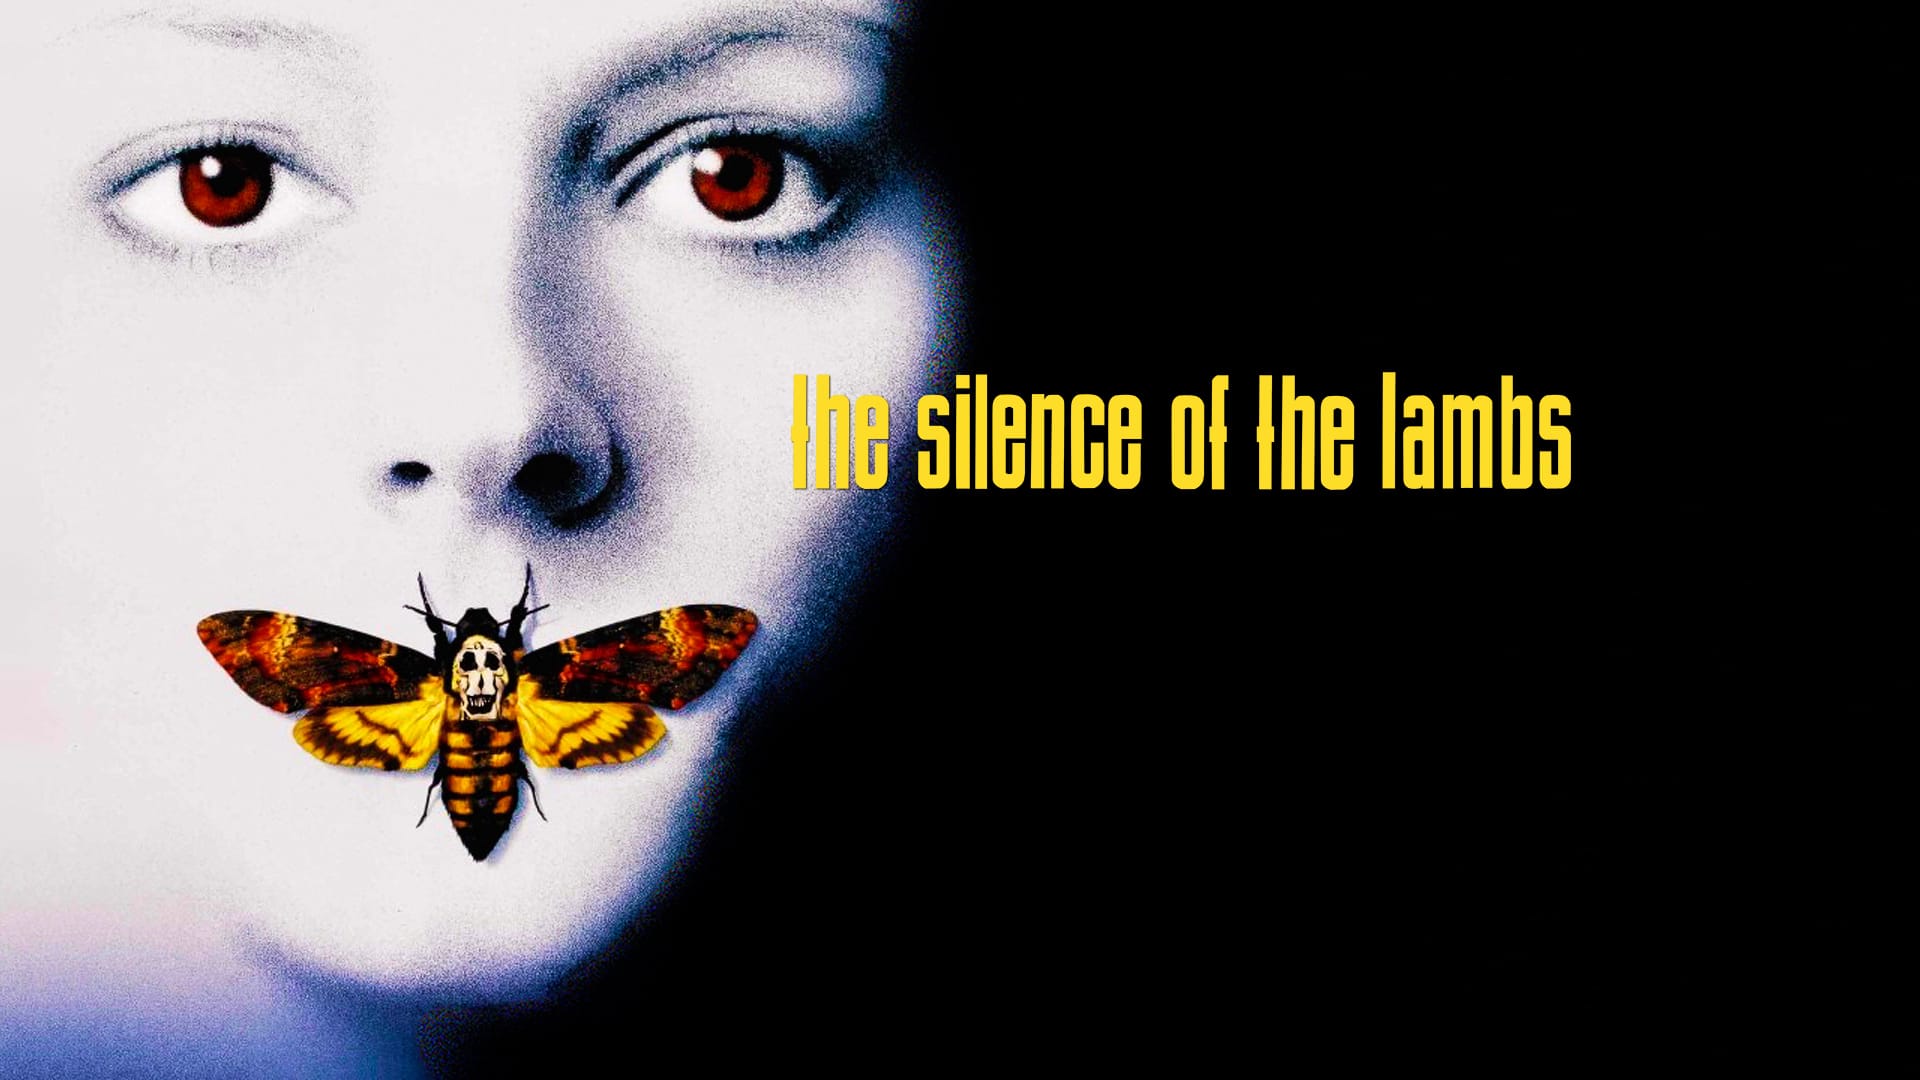 Watch The Silence of the Lambs Online | Stream Full Movies